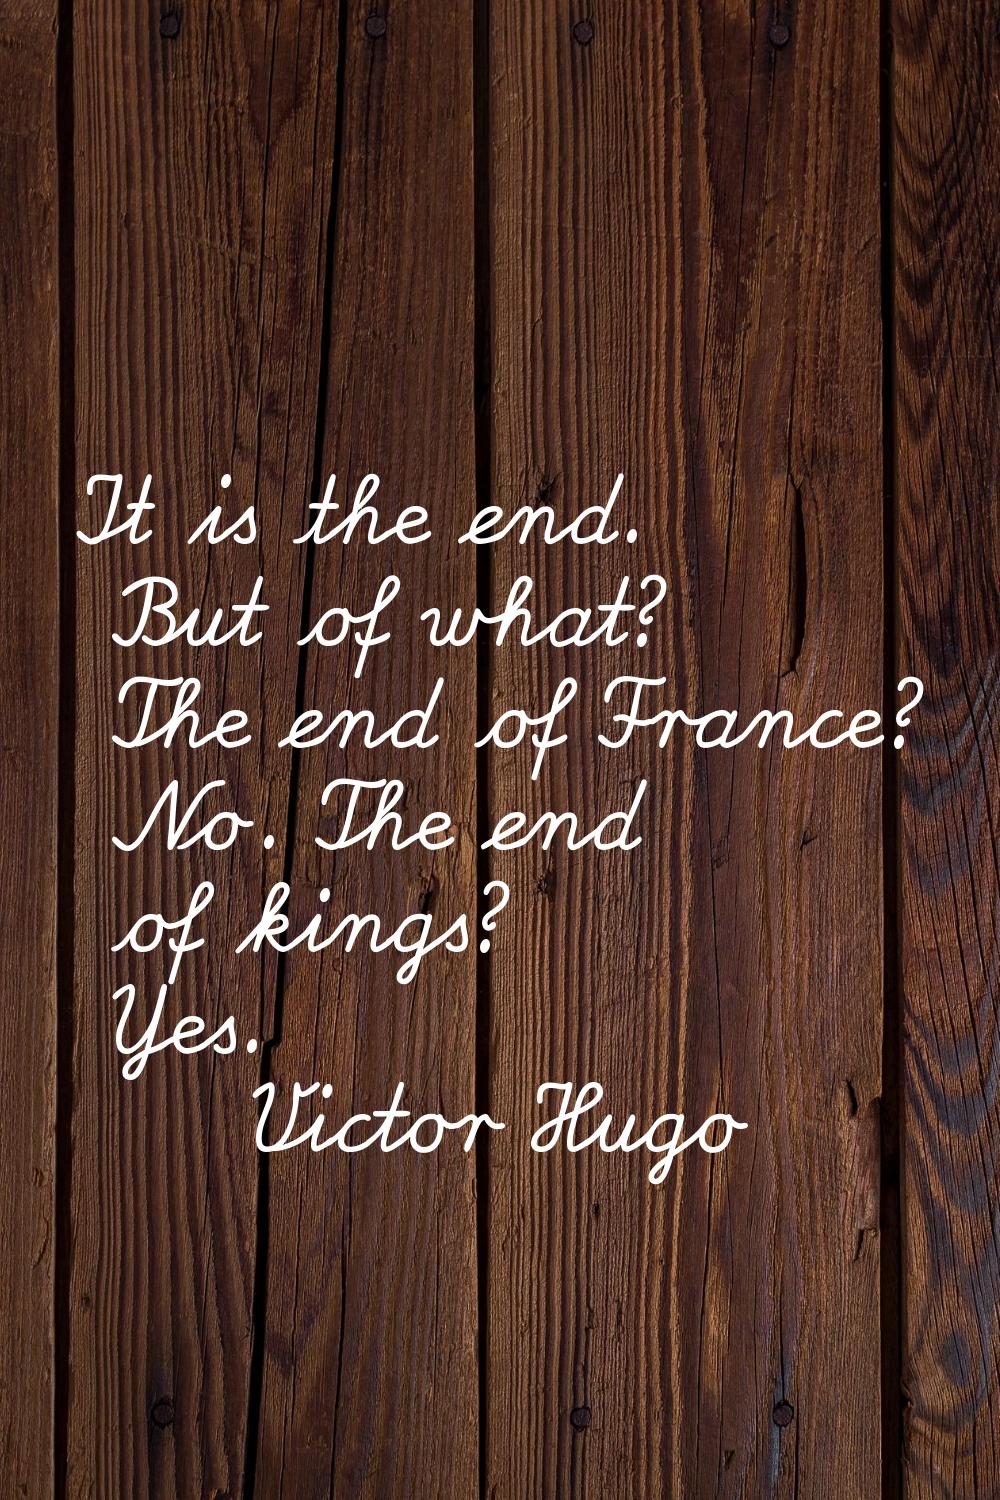 It is the end. But of what? The end of France? No. The end of kings? Yes.